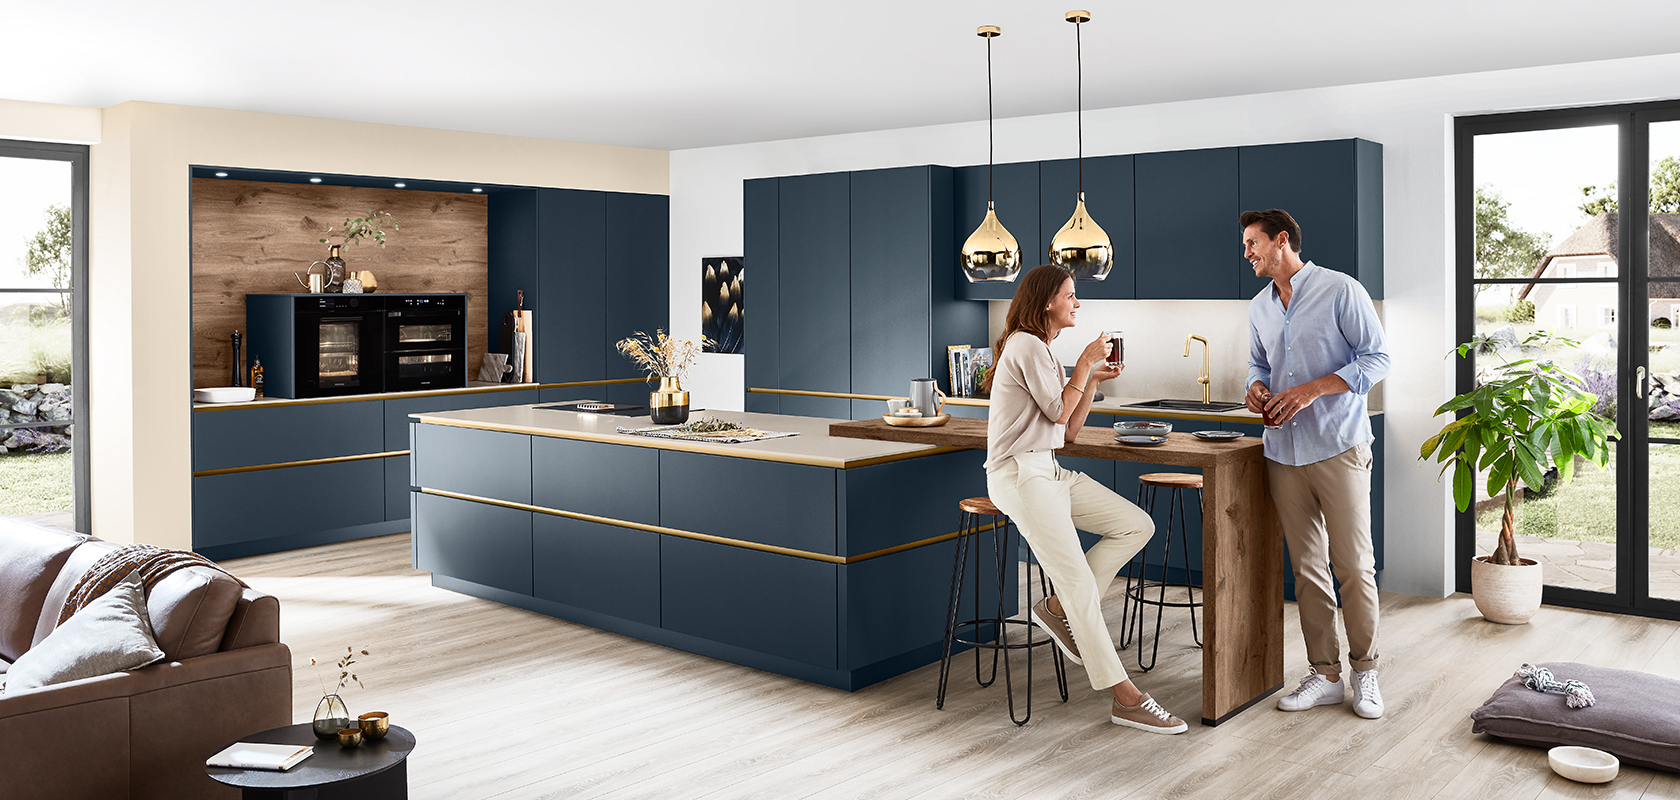 Modern kitchen interior with a couple enjoying wine around a stylish island with sleek navy cabinetry and elegant gold trim, under warm pendant lights.